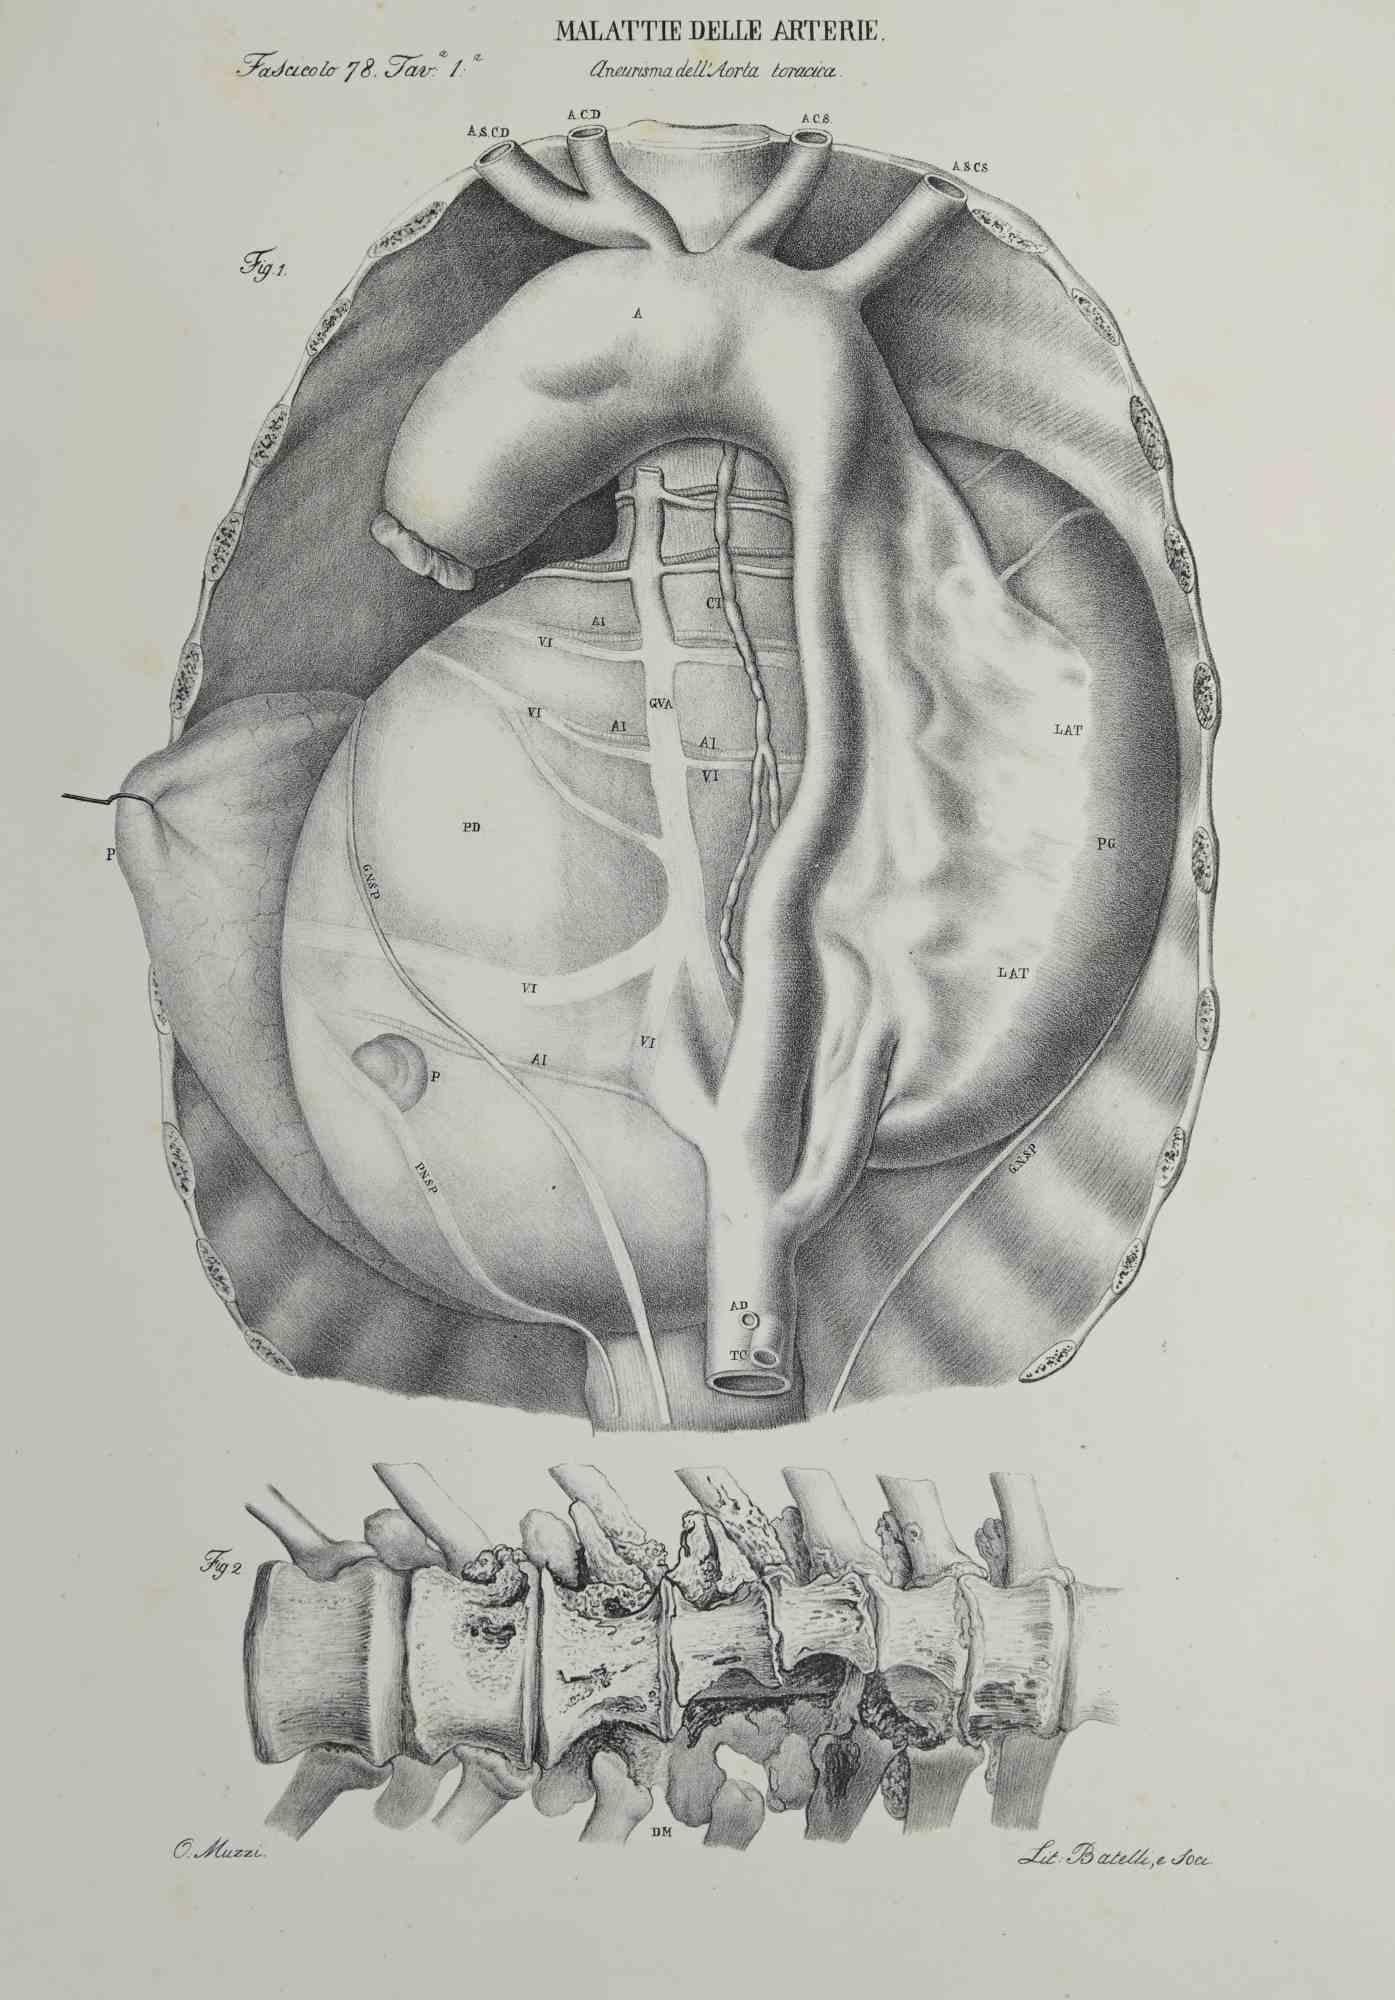 Artery Disease is a lithograph realized by Ottavio Muzzi for the edition of Antoine Chazal, Human Deseases, Printers Batelli and Ridolfi, 1843.

The work belongs to the Atlante generale della anatomia patologica del corpo umano by Jean CRUVEILHIER,